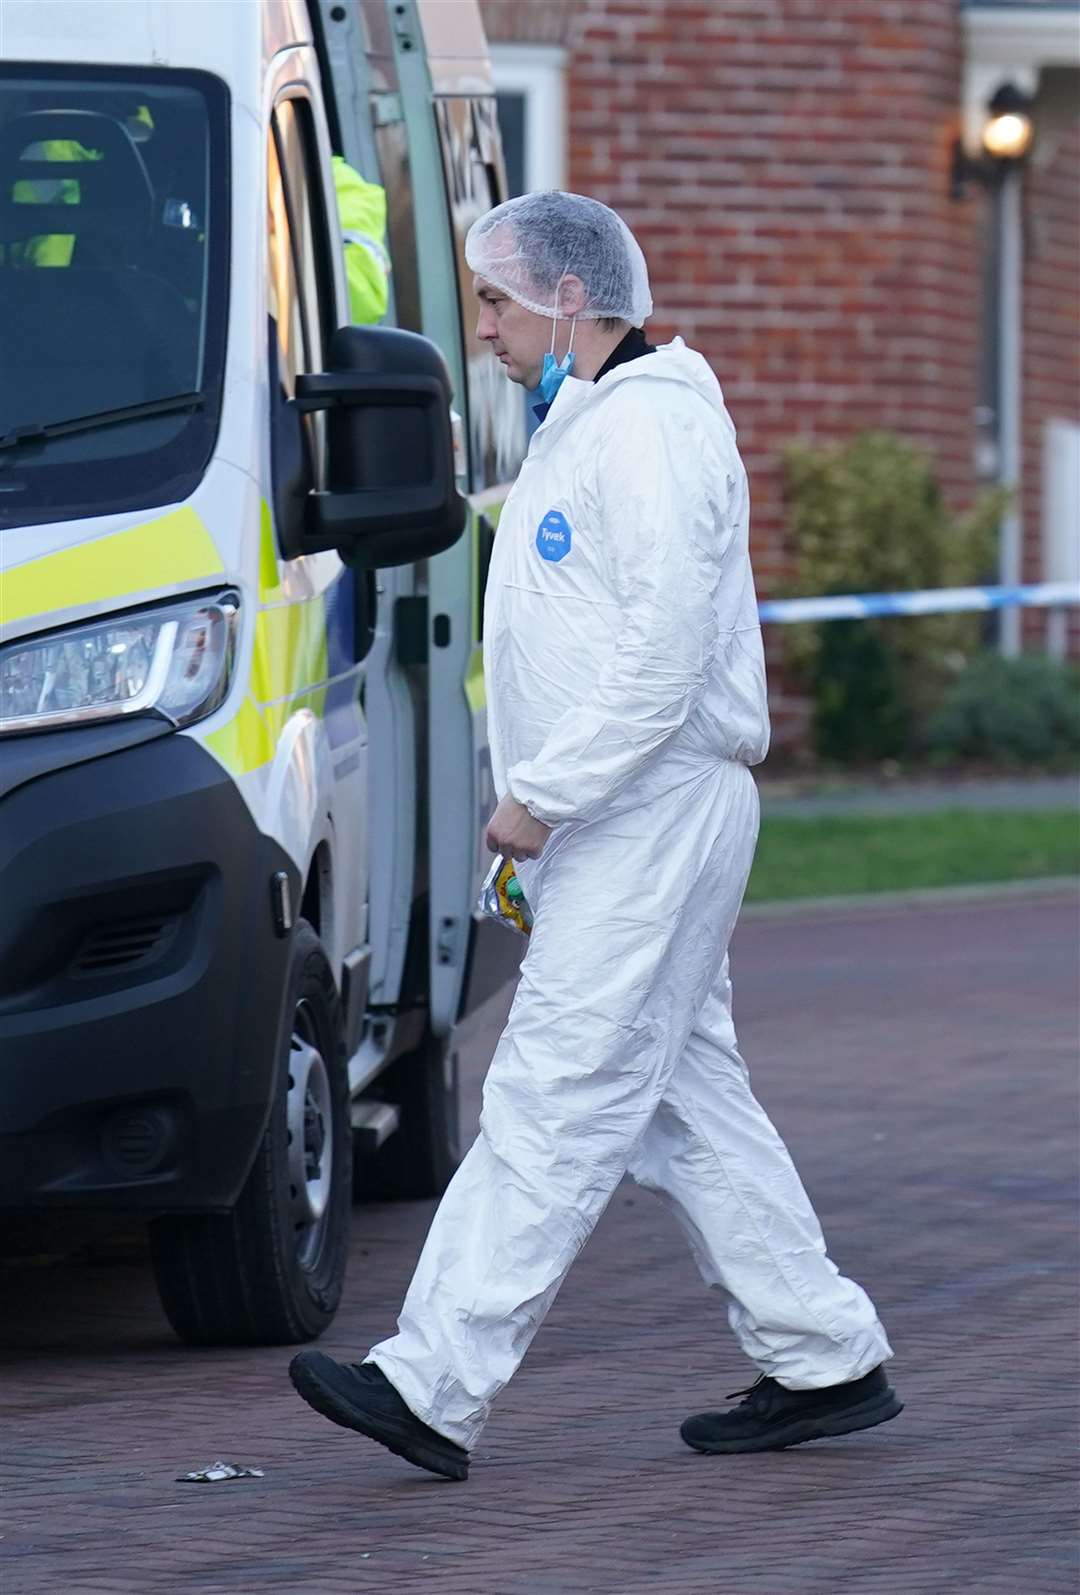 A forensic investigator outside a house in Costessey near Norwich (Joe Giddens/ PA)